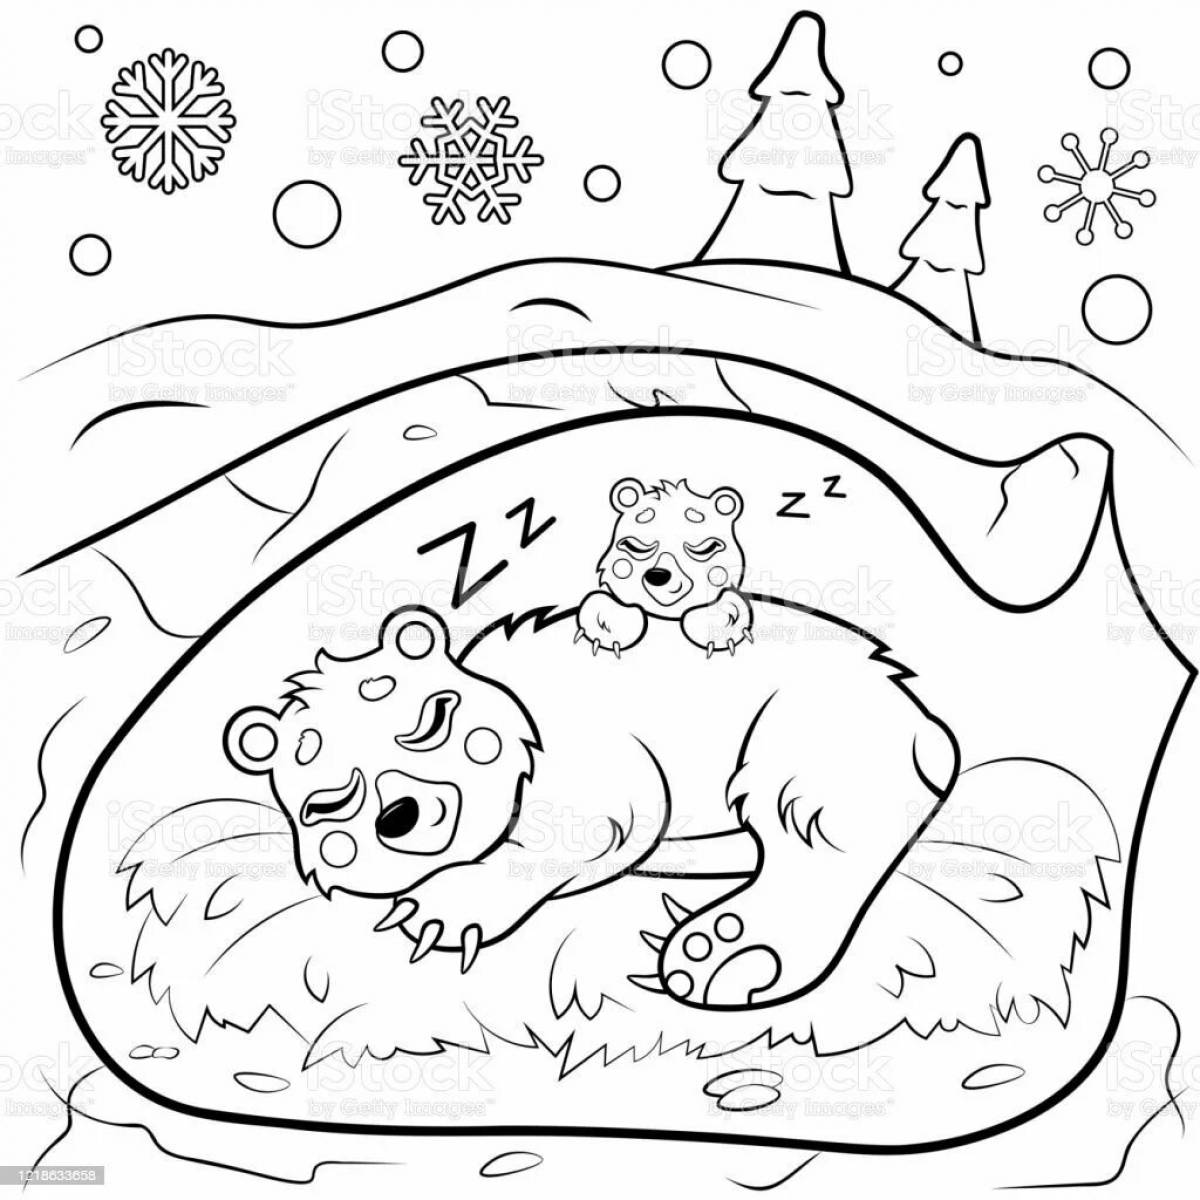 Wonderful bear in the den coloring pages for children